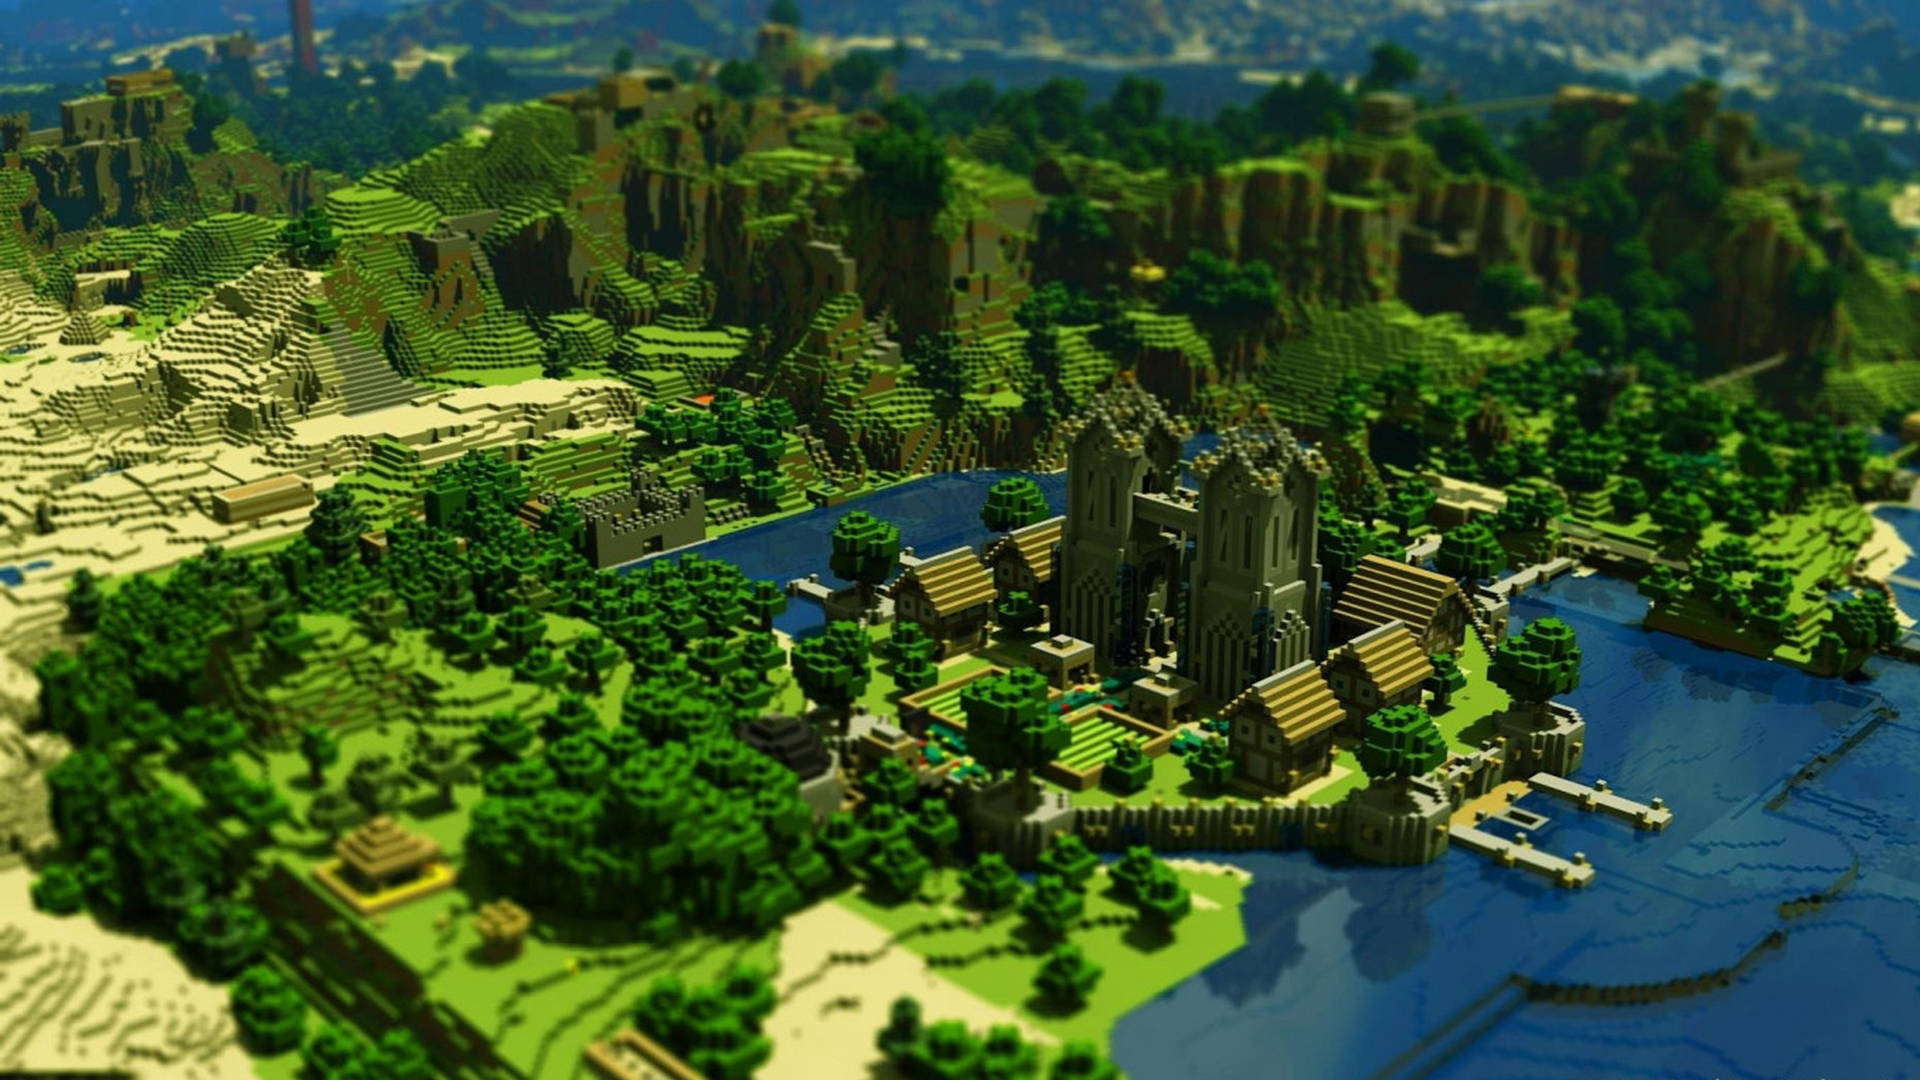 Town Surrounded By Woods 2560x1440 Minecraft Picture